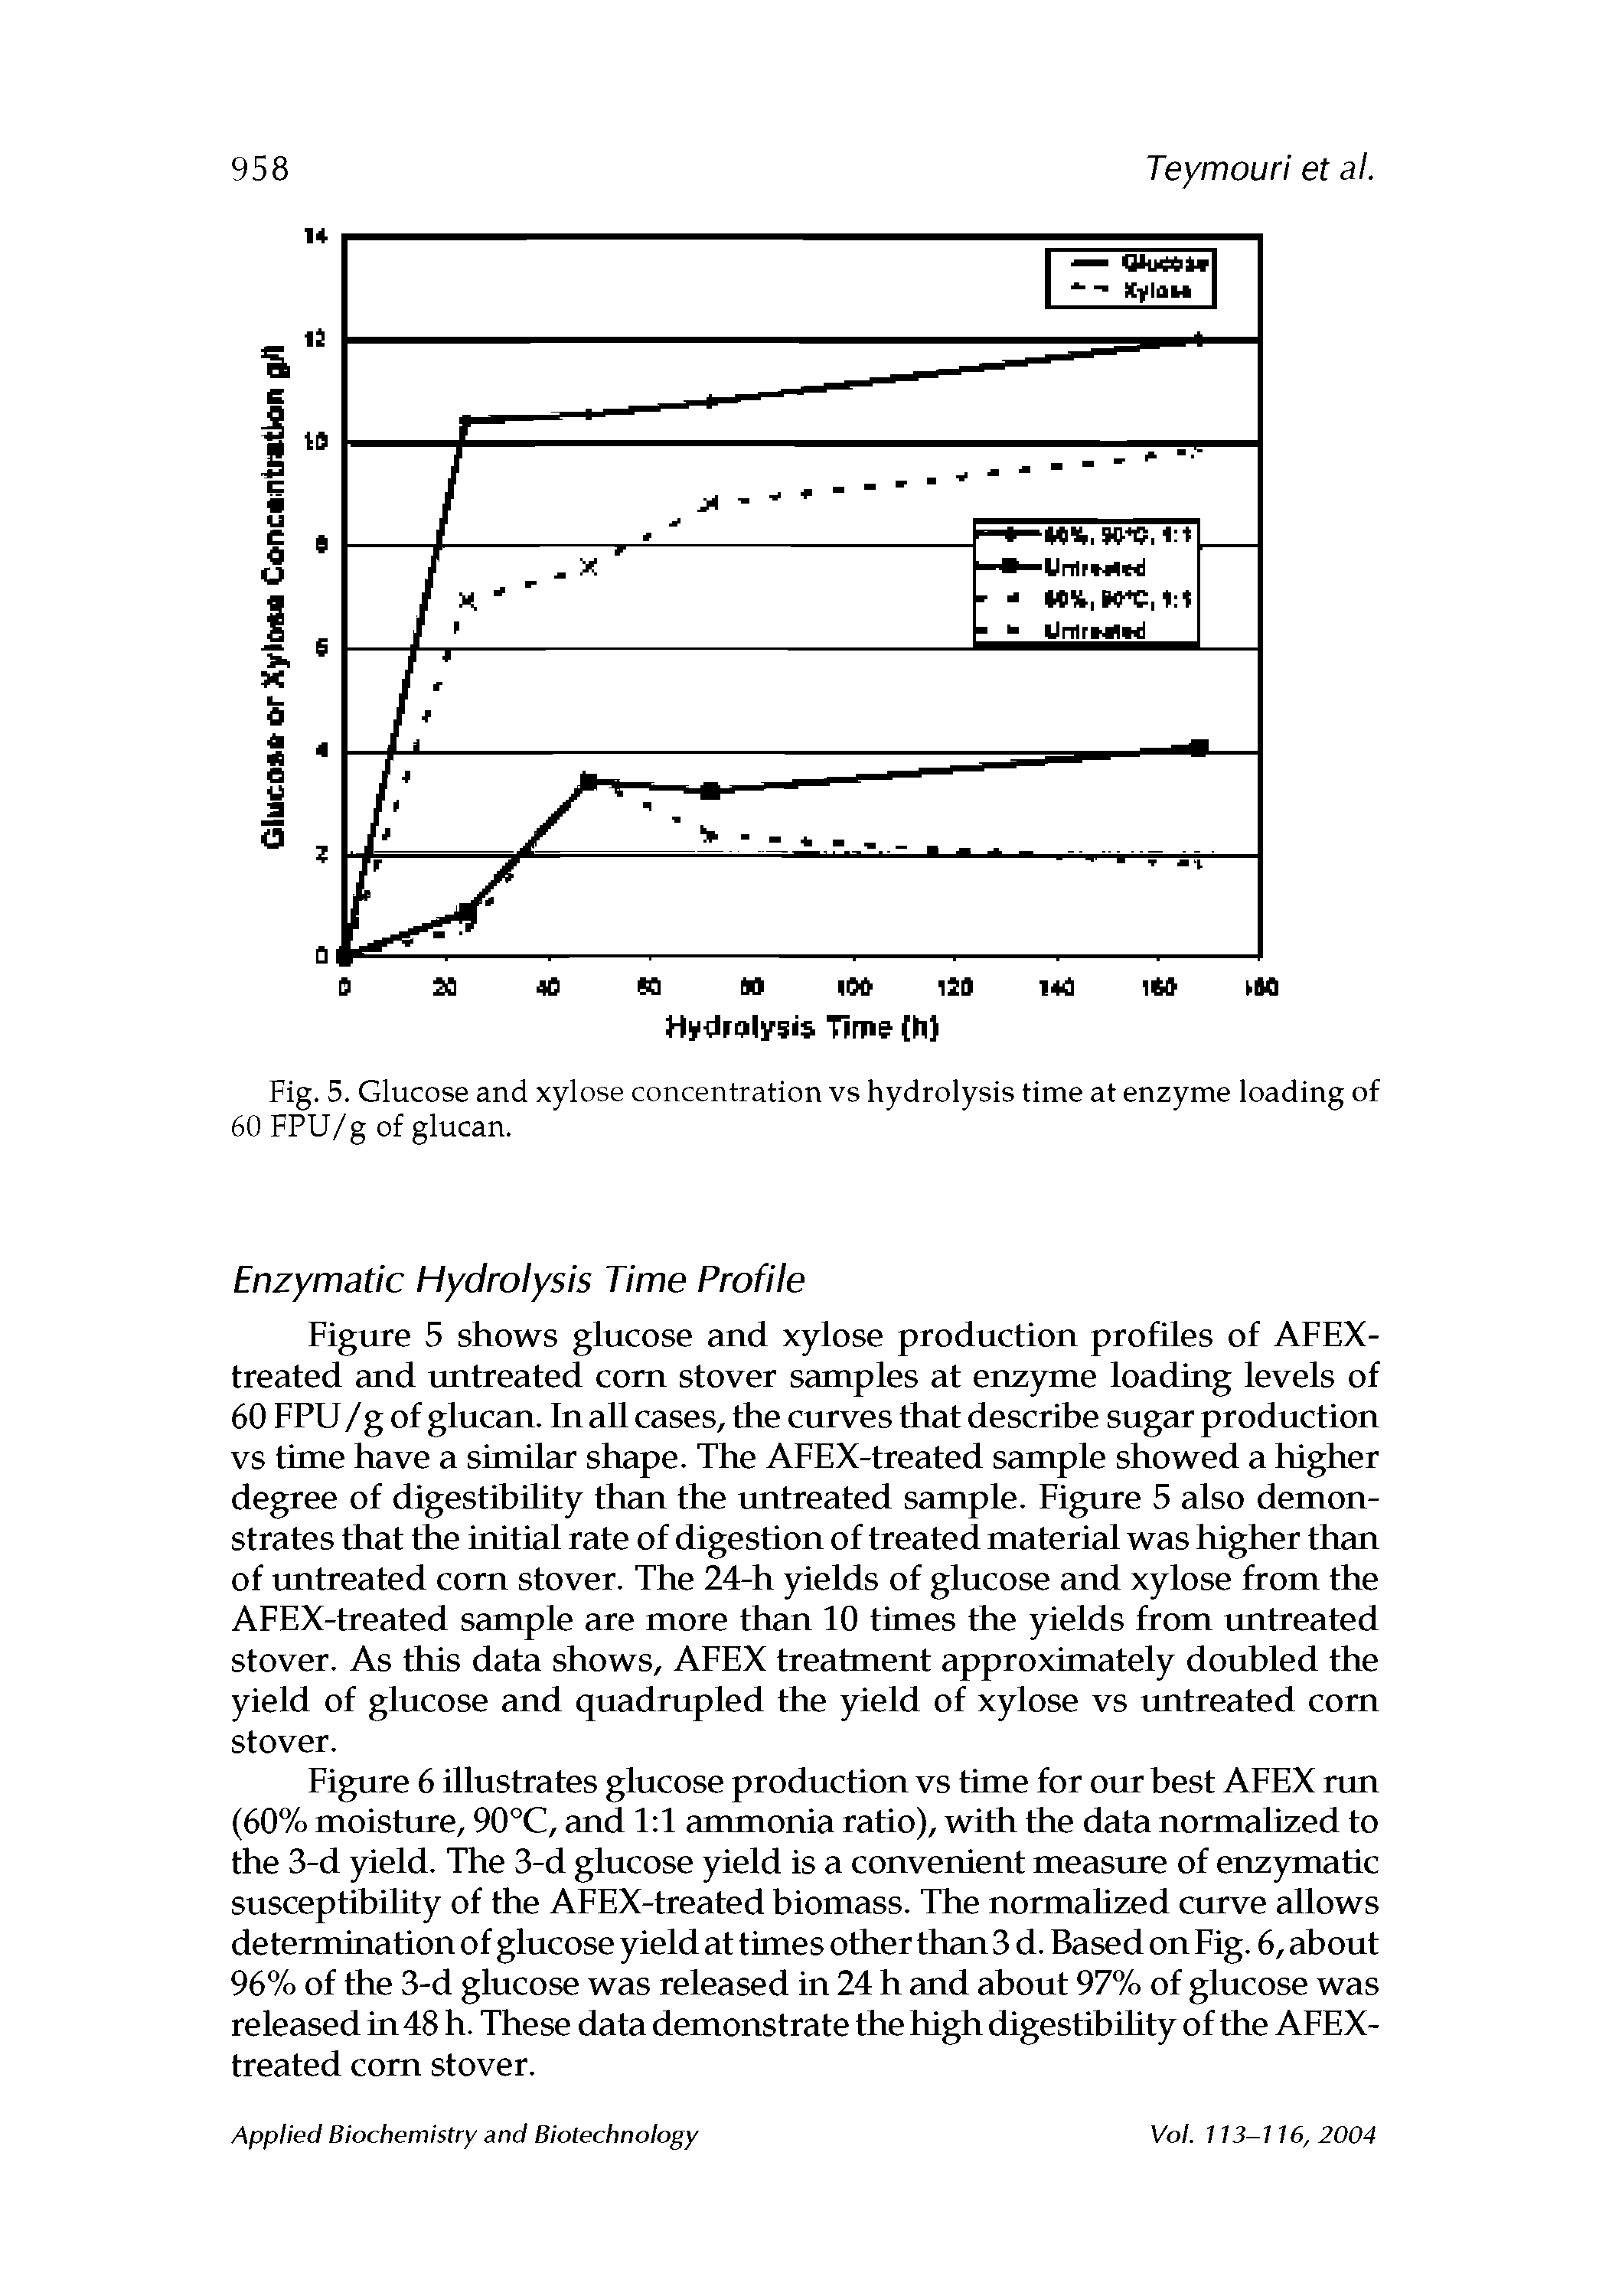 Fig. 5. Glucose and xylose concentration vs hydrolysis time at enzyme loading of 60 FPU/g of glucan.